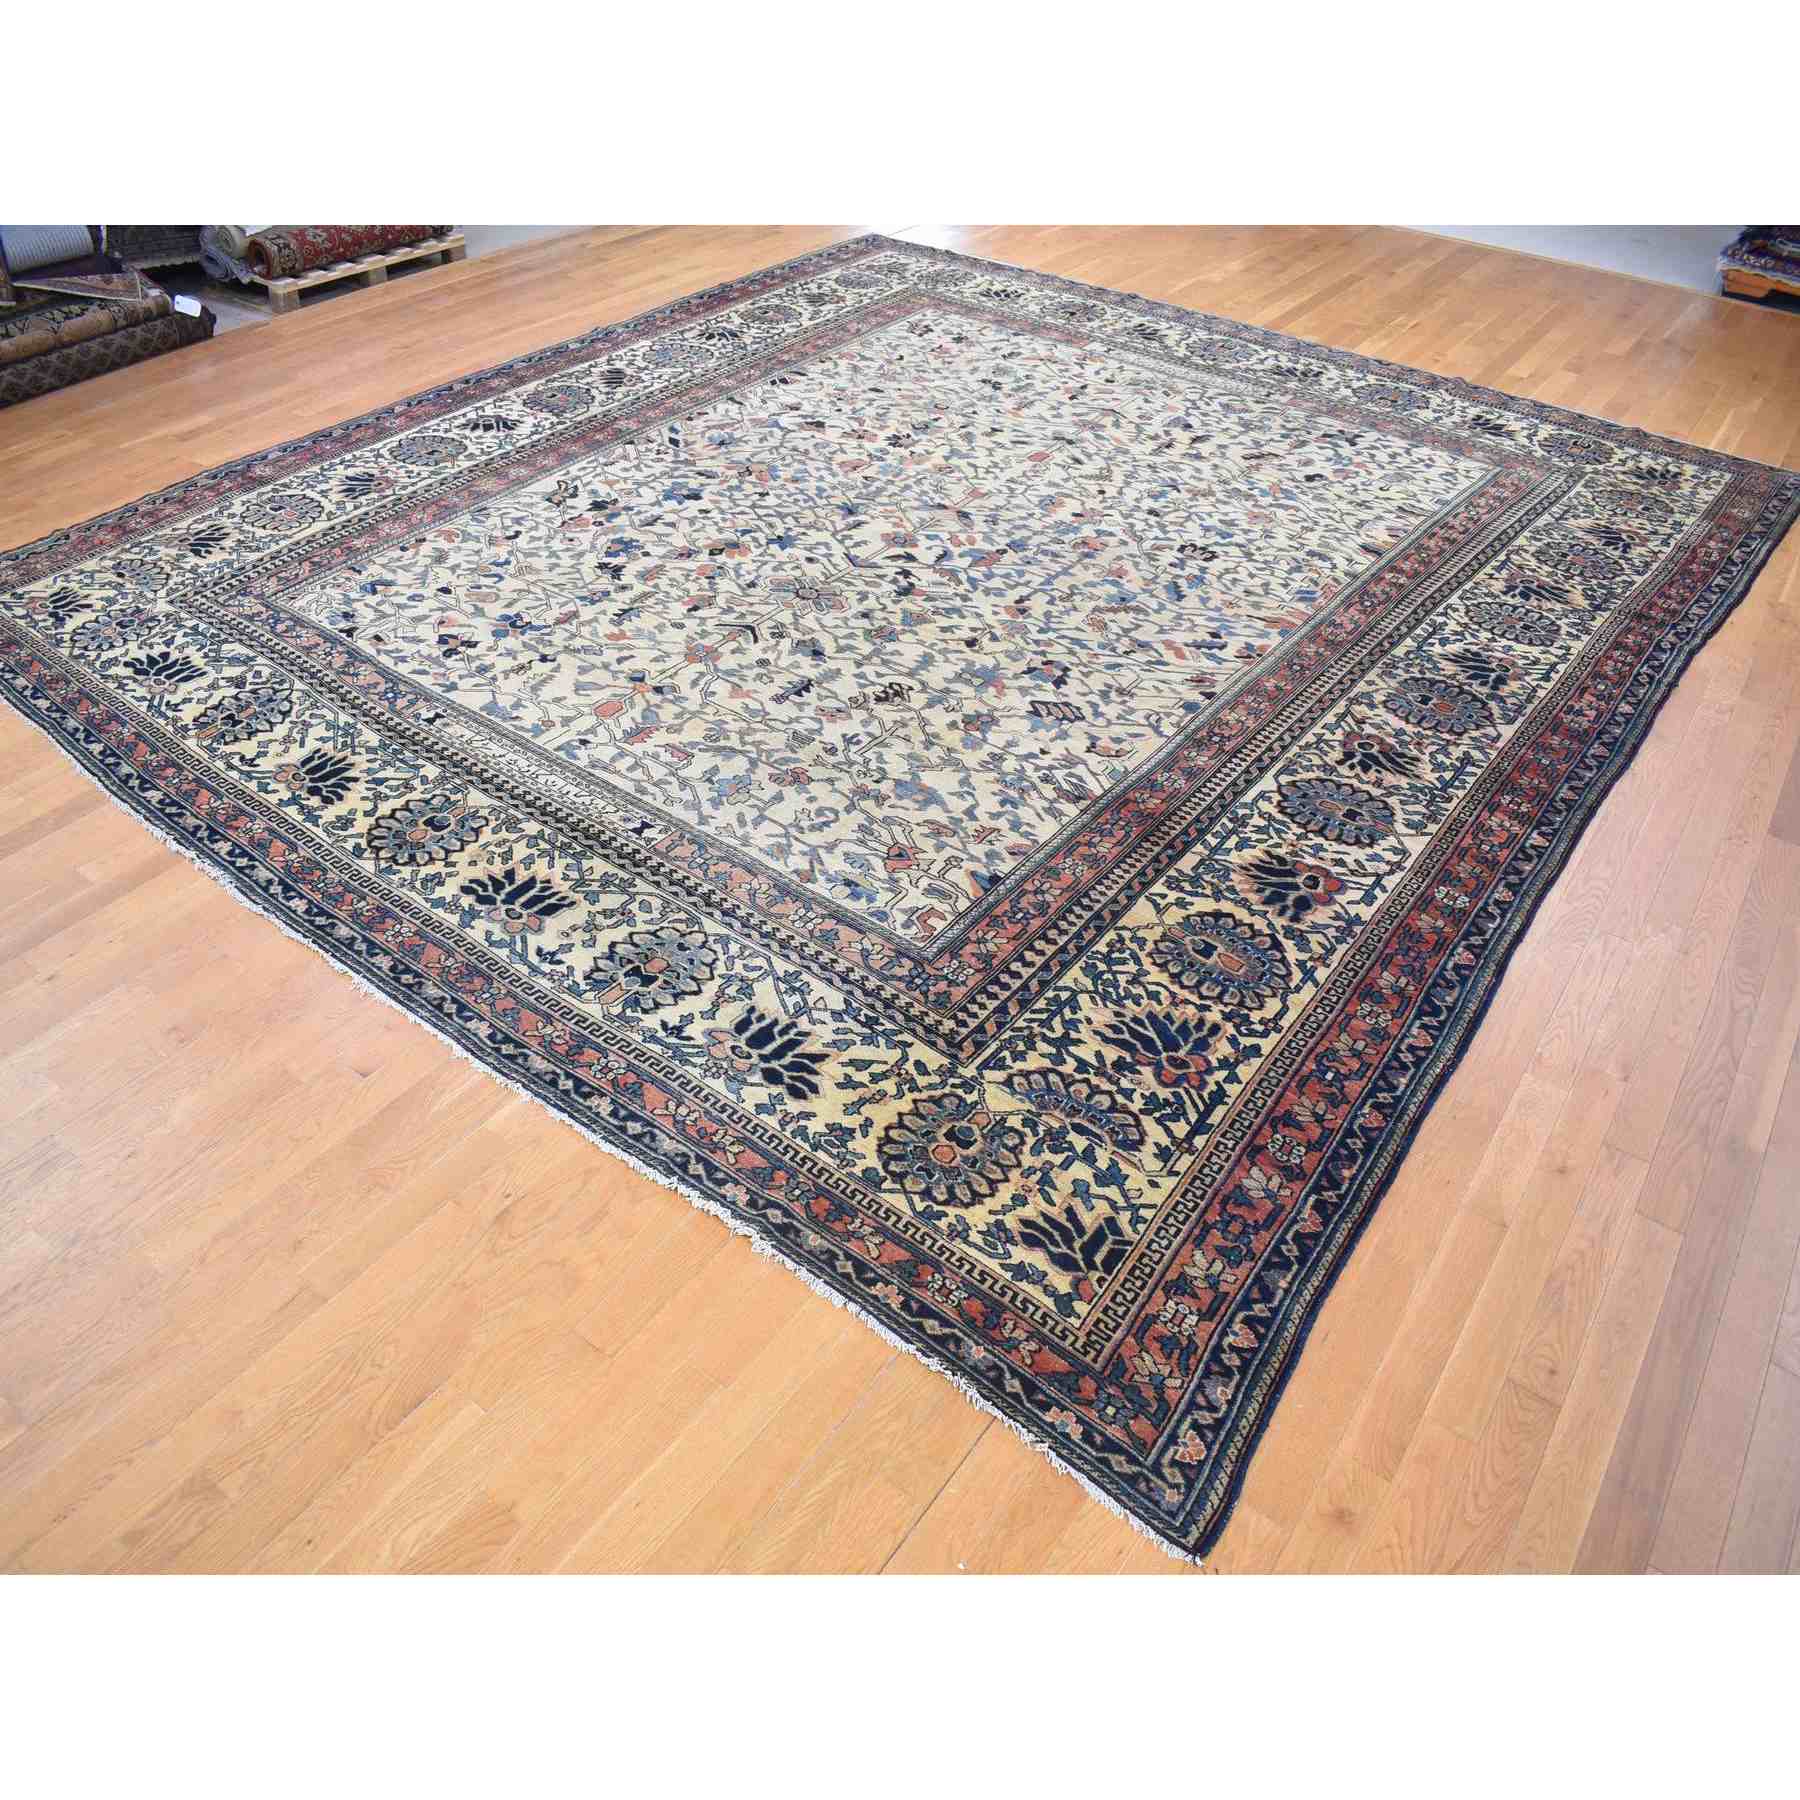 Antique-Hand-Knotted-Rug-400275